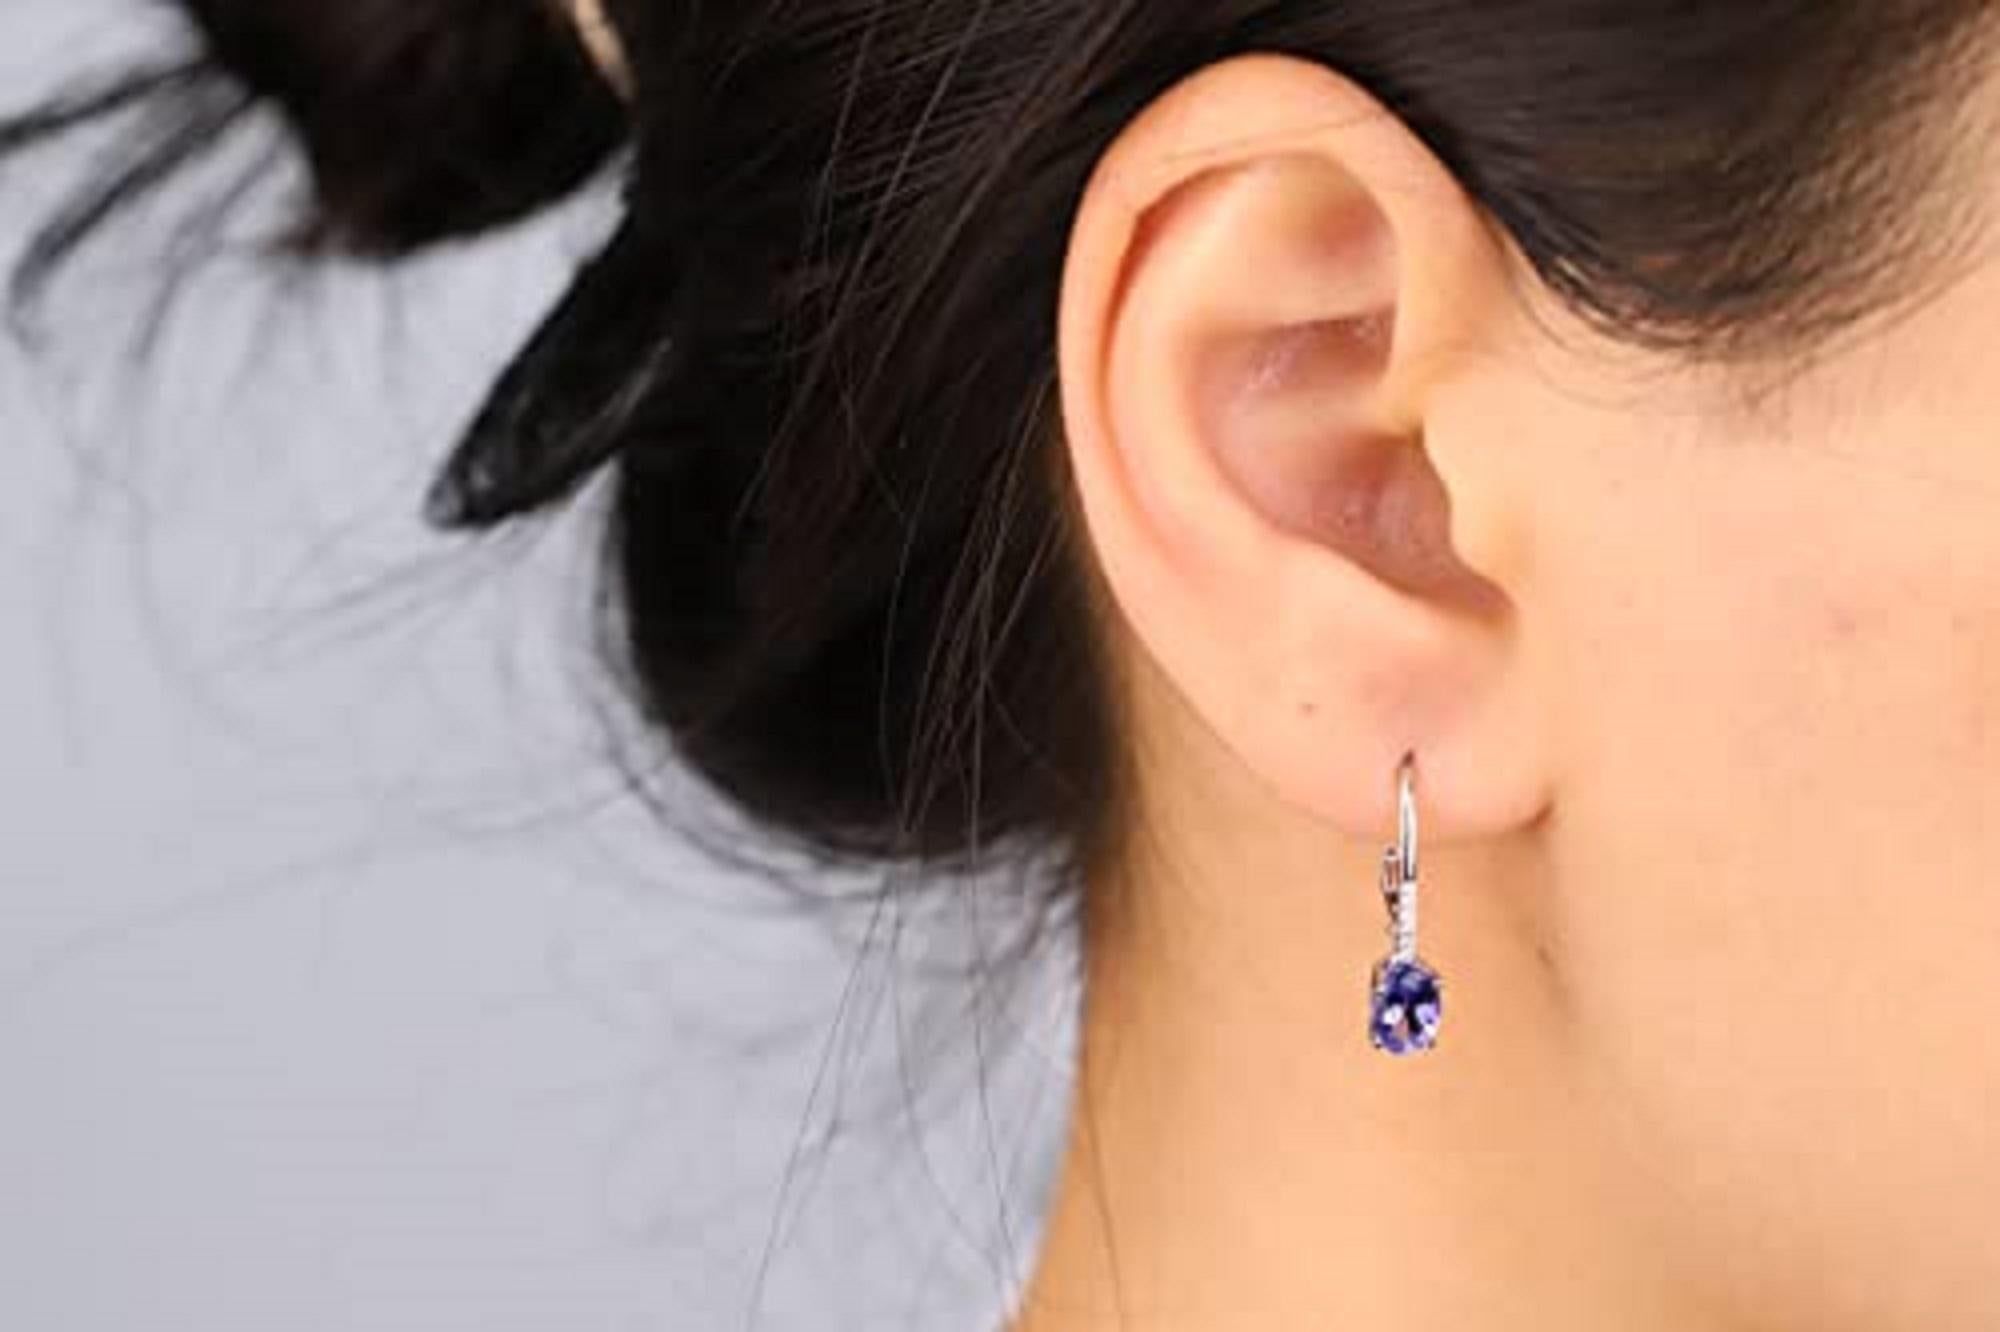 Decorate yourself in elegance with this Earring is crafted from 14-karat White Gold by Gin & Grace. This Earring is made up of 7x5 mm Oval-Cut (2 pcs) 1.62 carat Tanzanite and Round-cut White Diamond (12 Pcs) 0.06 Carat . This Earring is weight 1.48